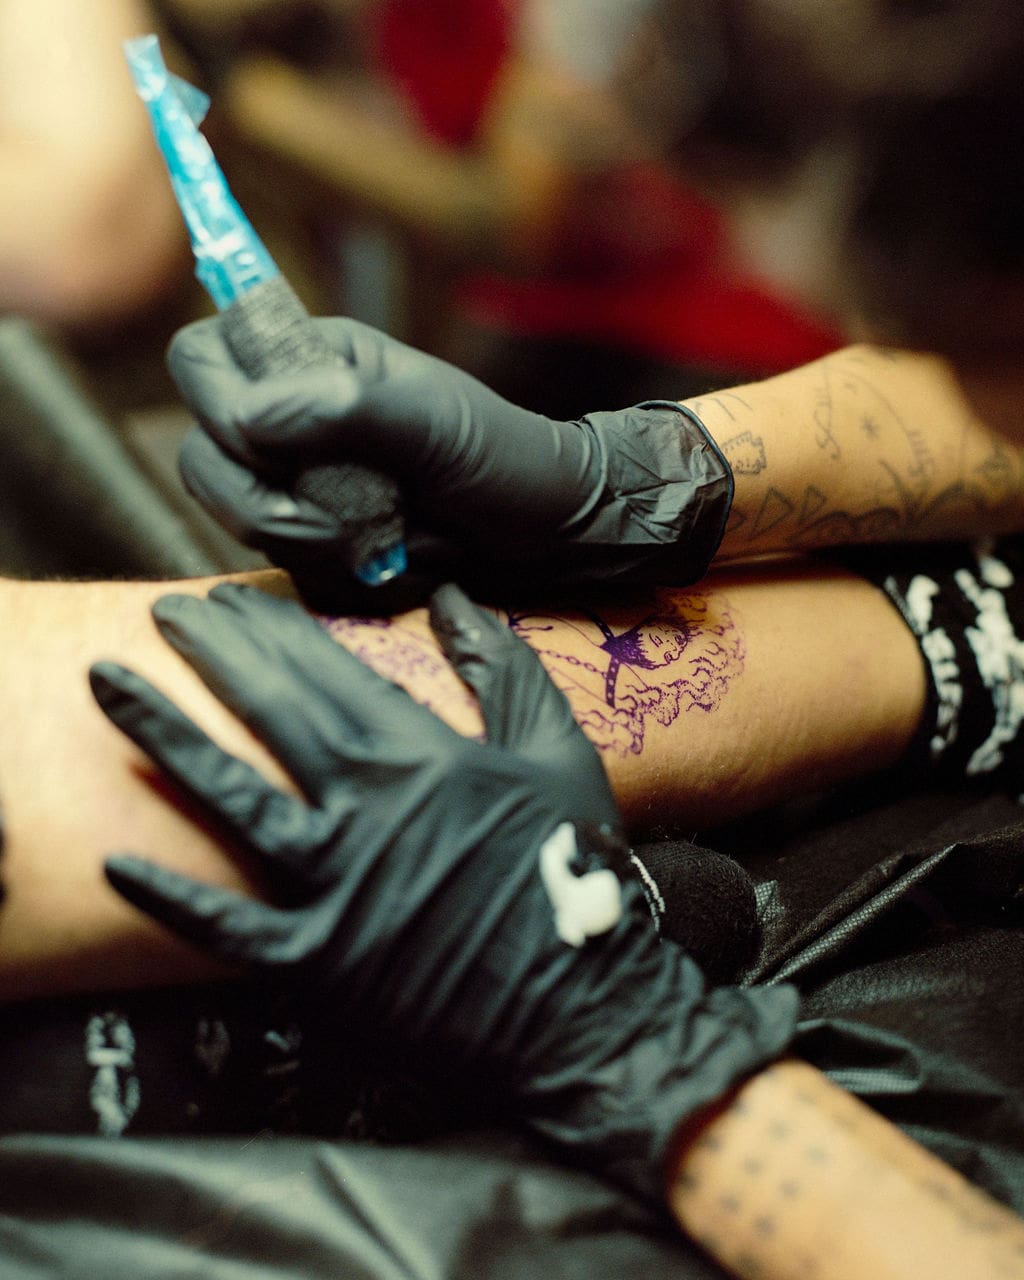 An interview with Tati Compton | A close-up of Tati tattooing in her LA studio